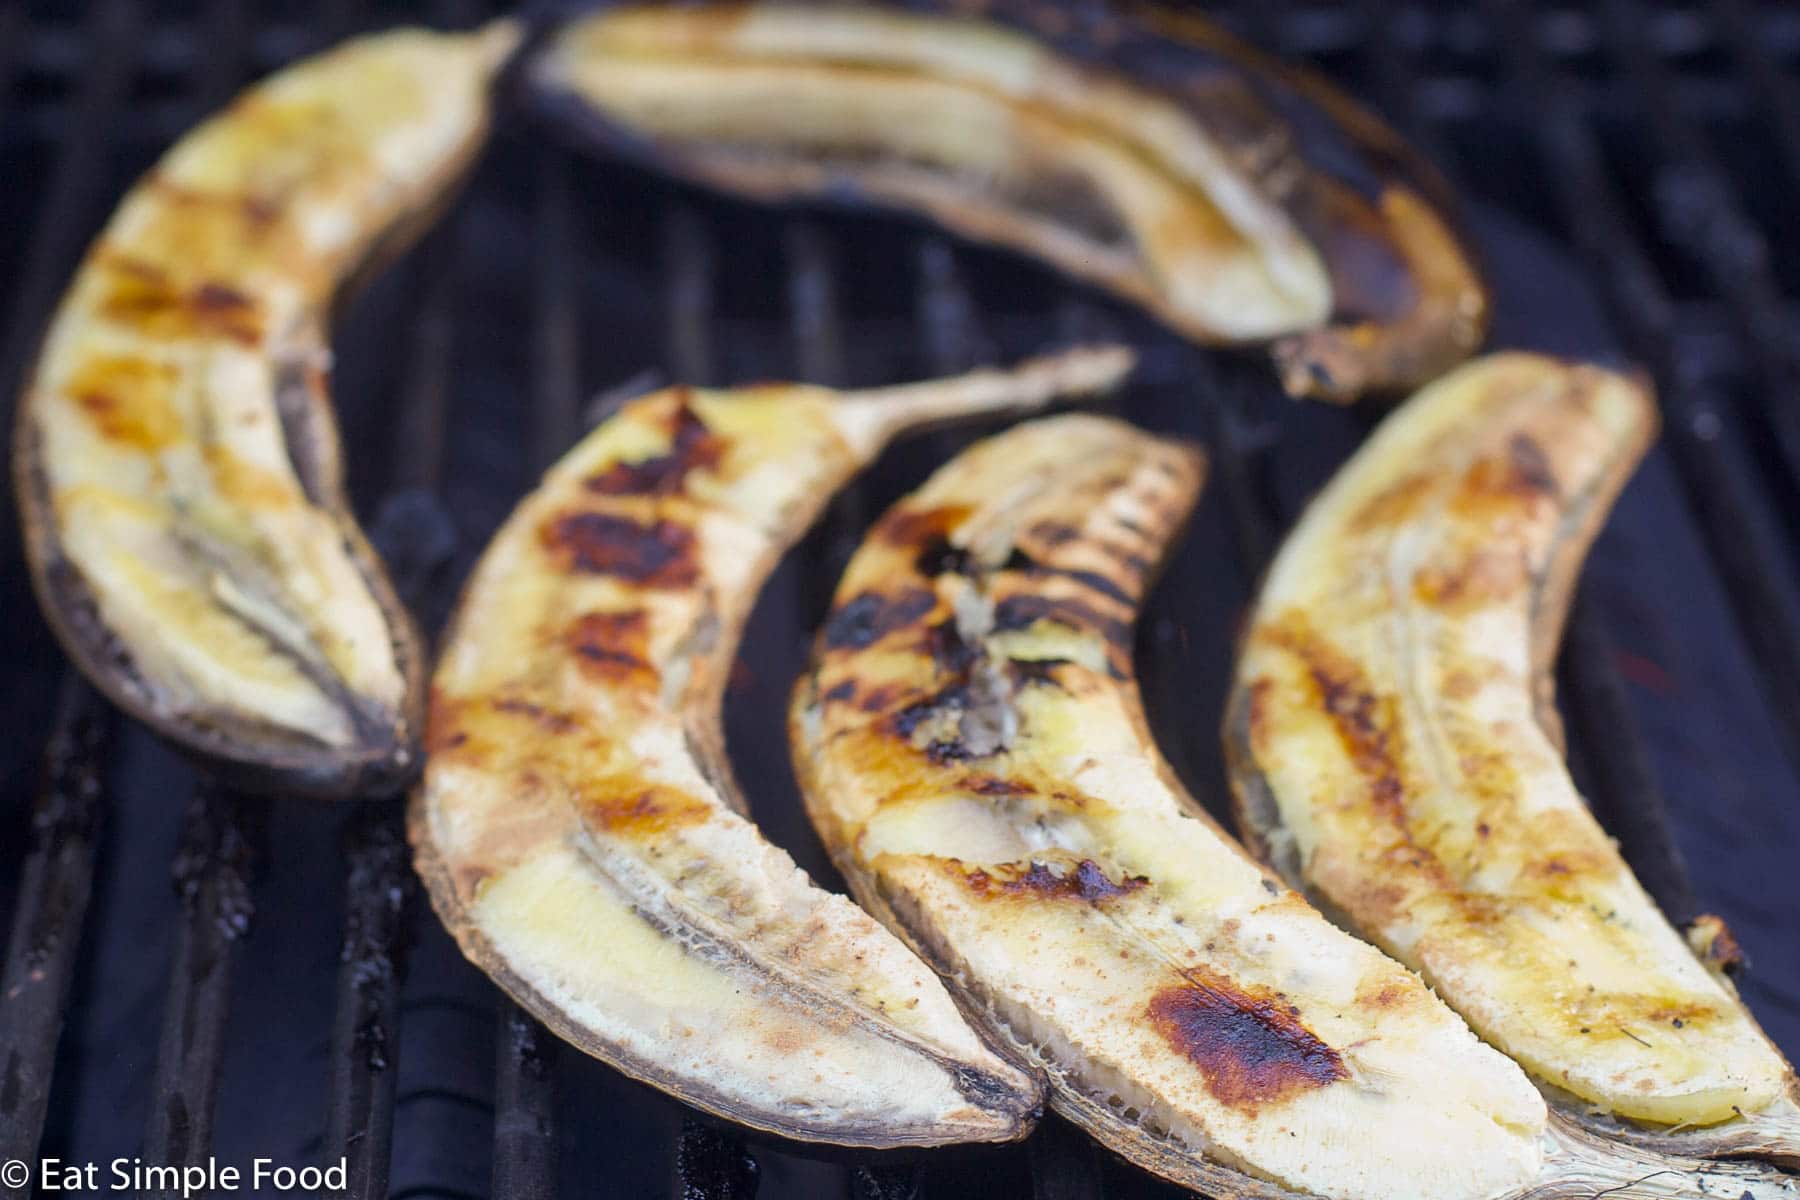 5 halved bananas with the peel on and facing down toward the grill. Flesh side facing up and browned by grill marks.